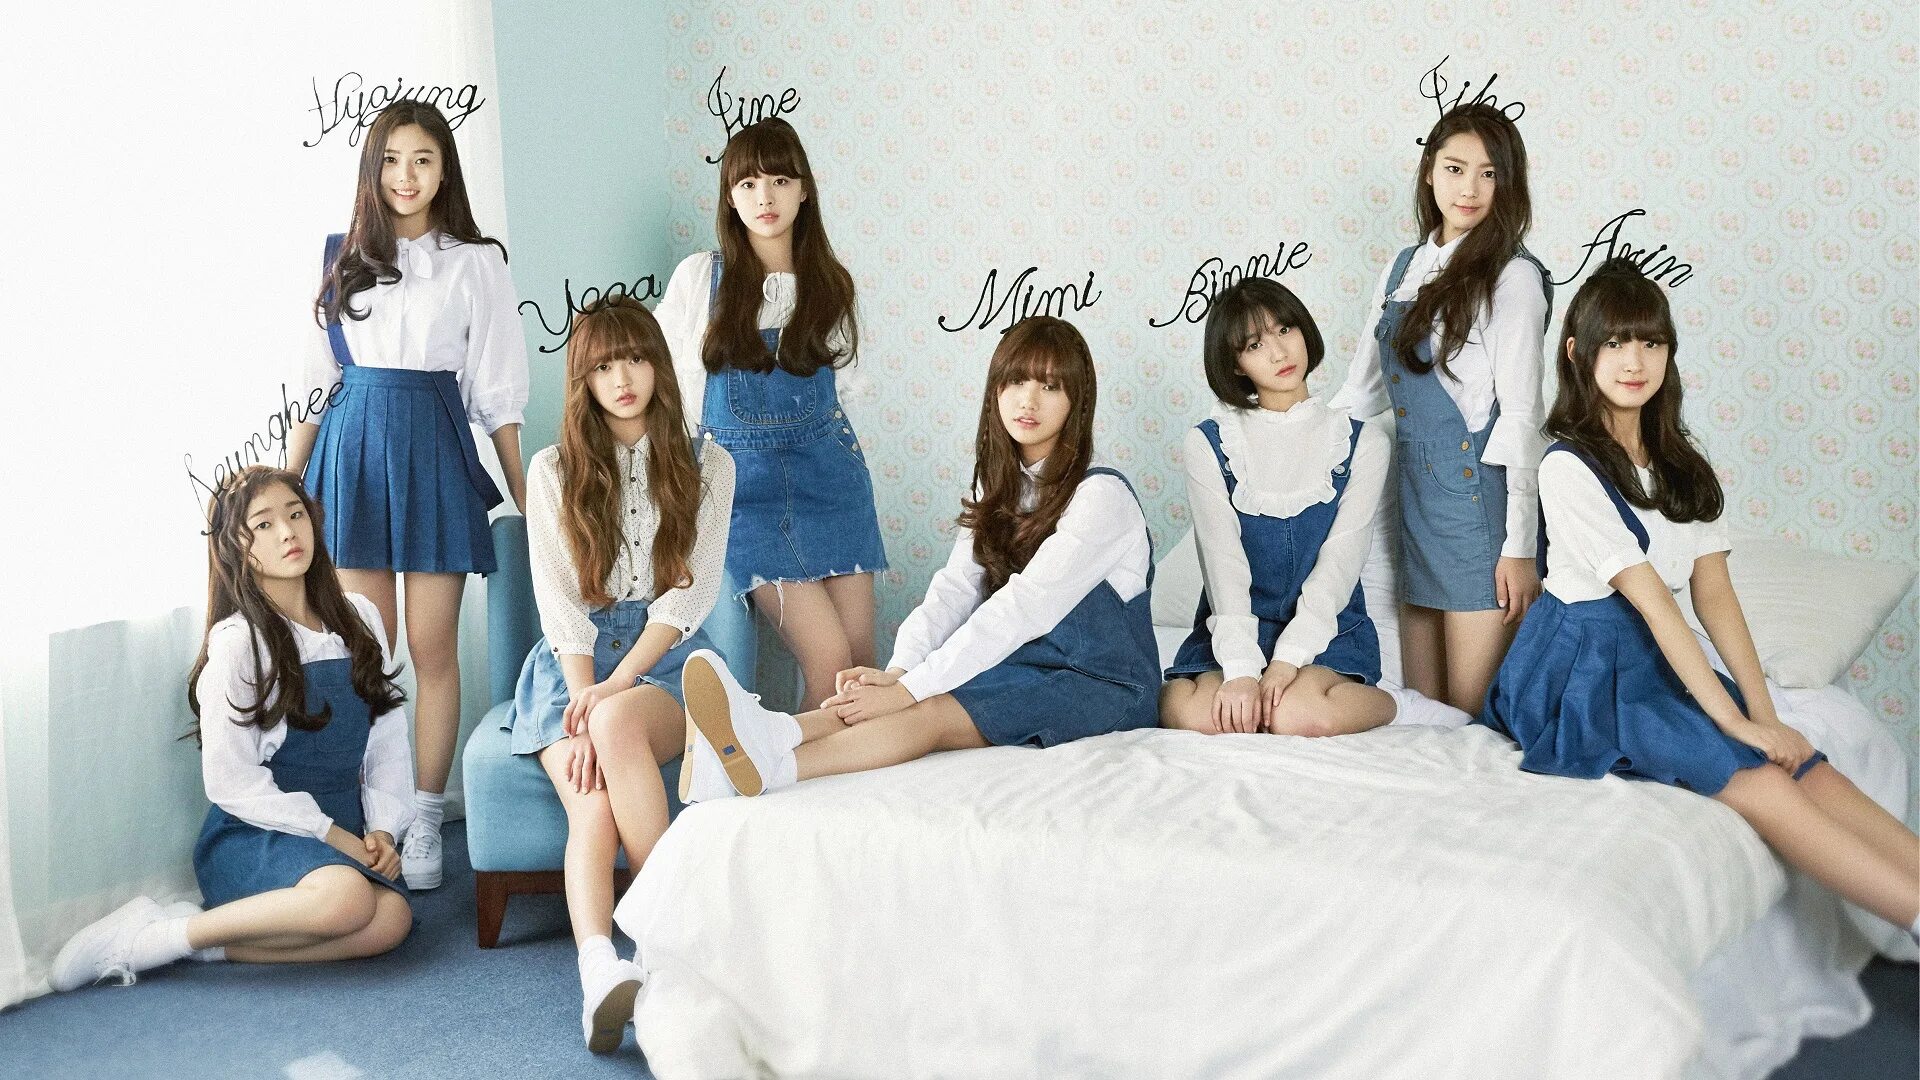 Oh my lots of. Группа Oh my girl. Oh my girl участницы. Oh my girl группа 2020. Kpop группа Oh my girl.